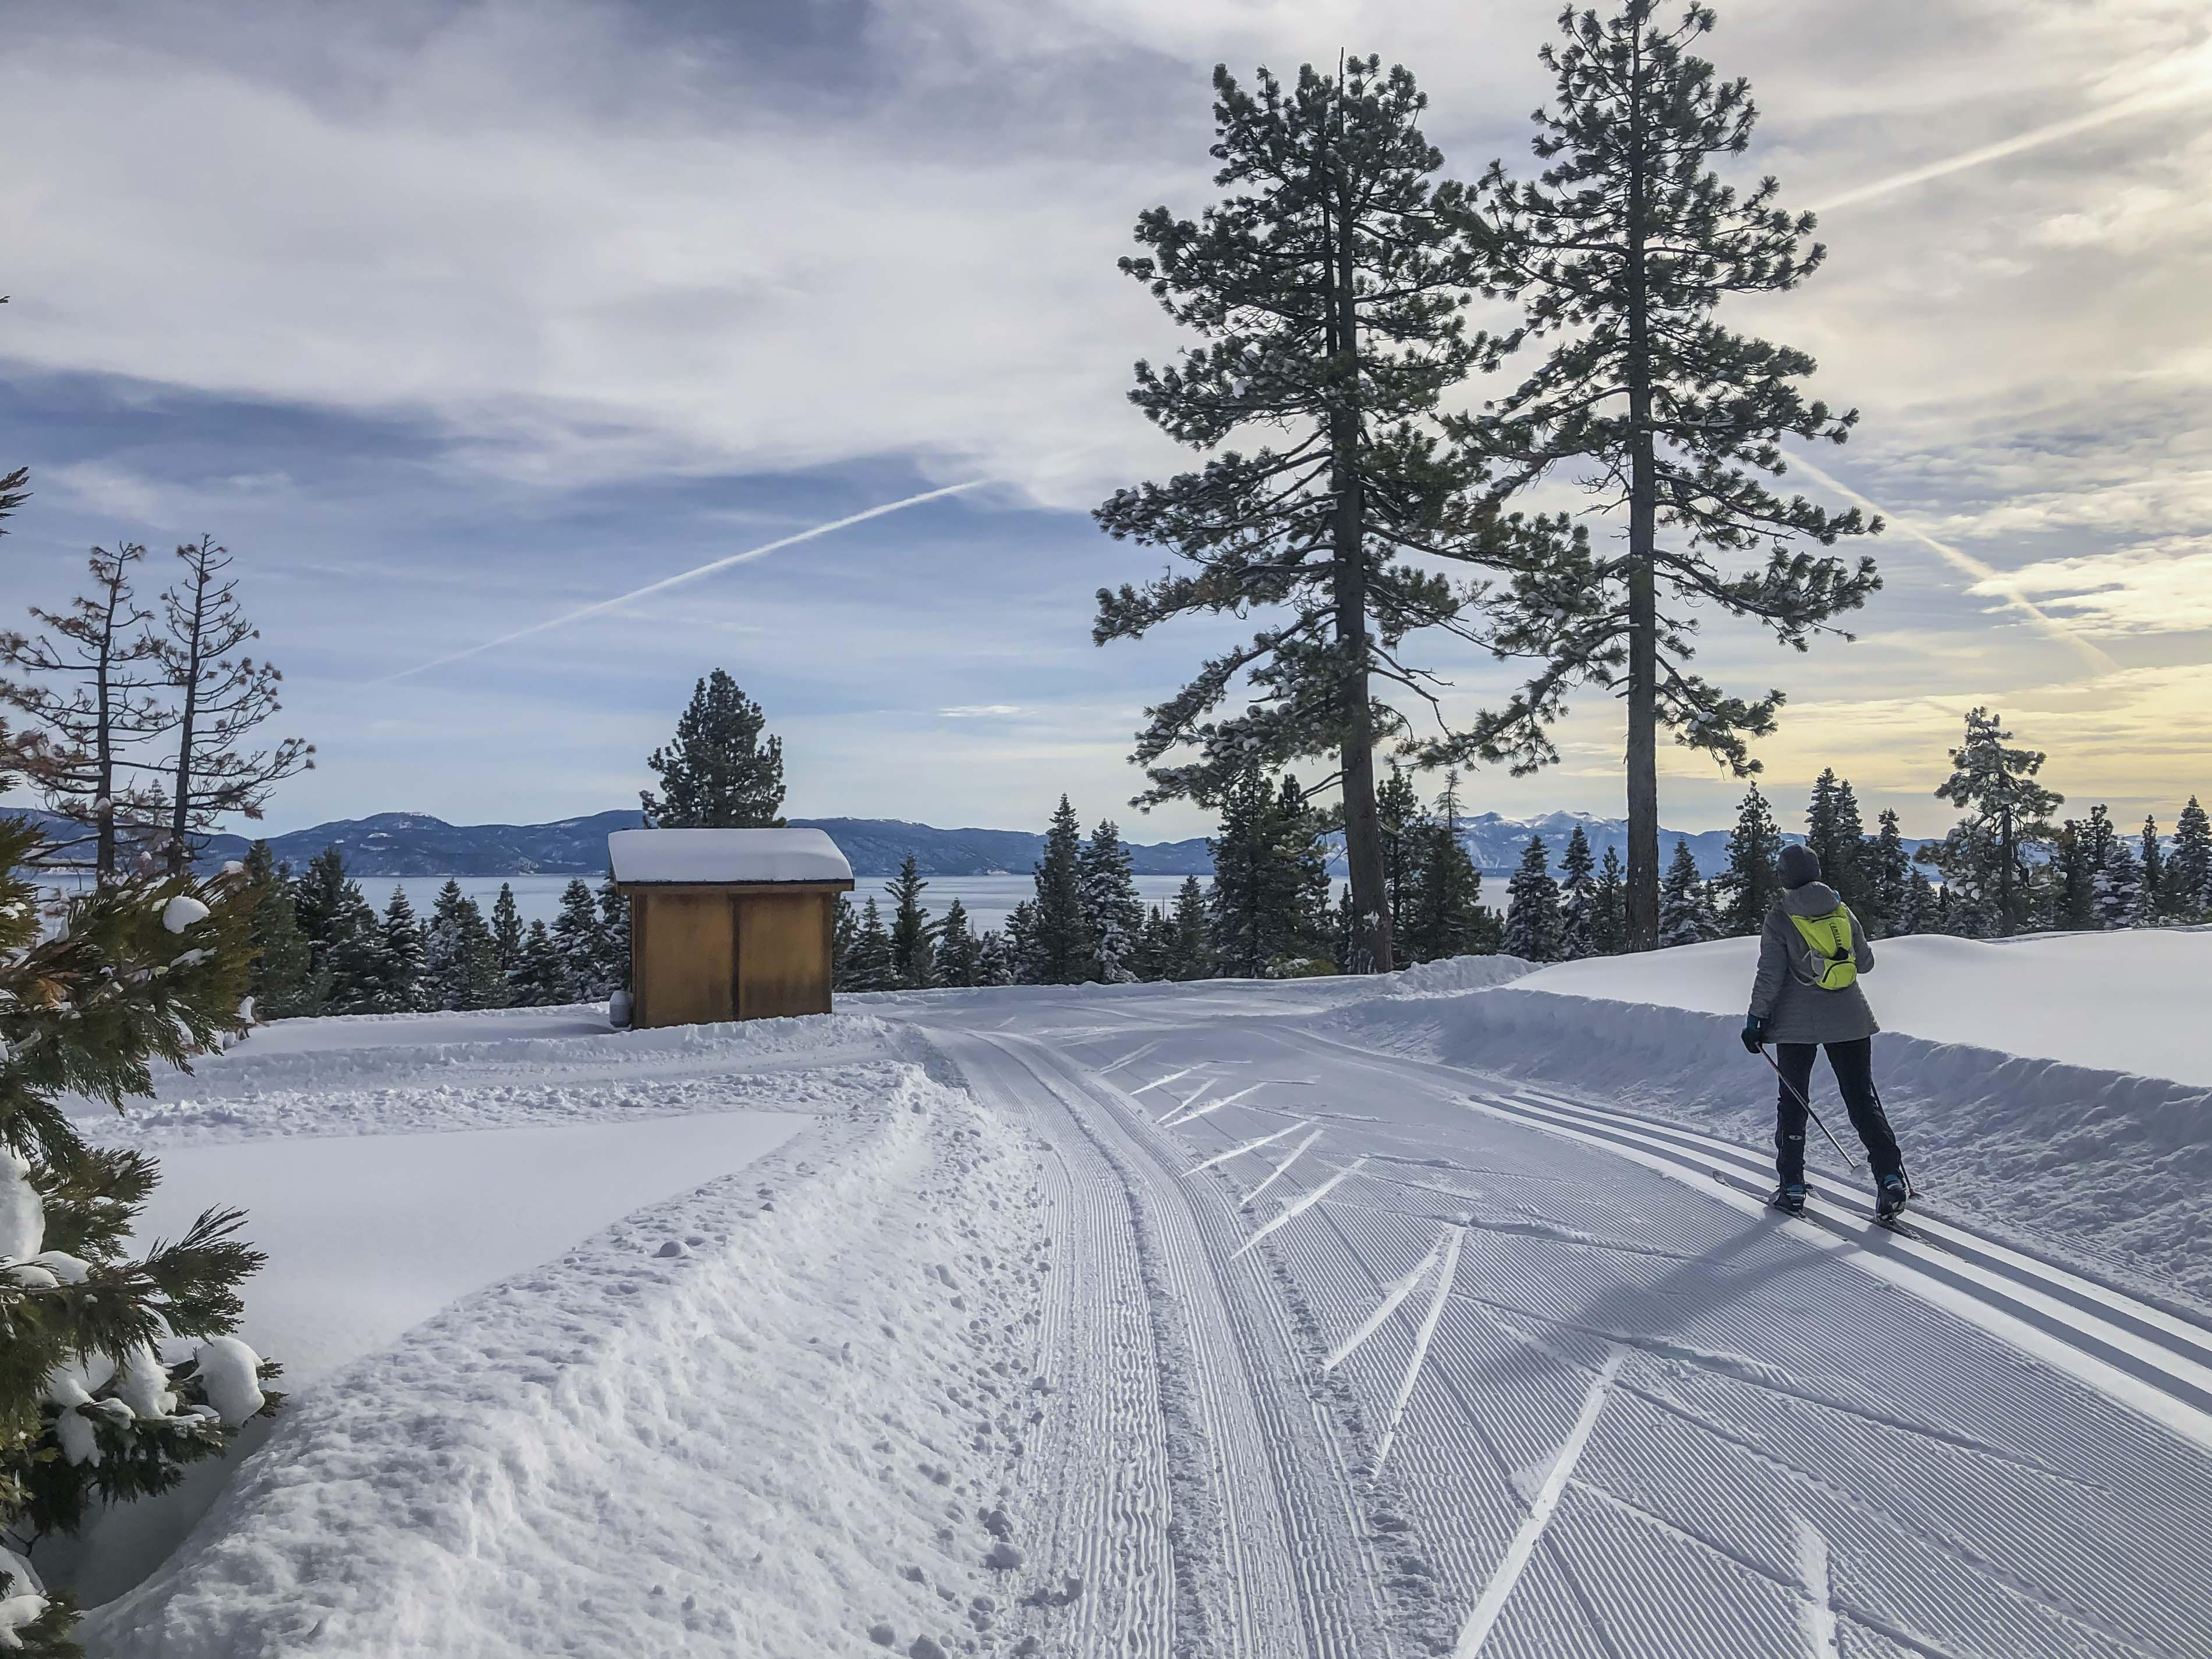 Cross-country skier on Silver Trail with view of Lake Tahoe